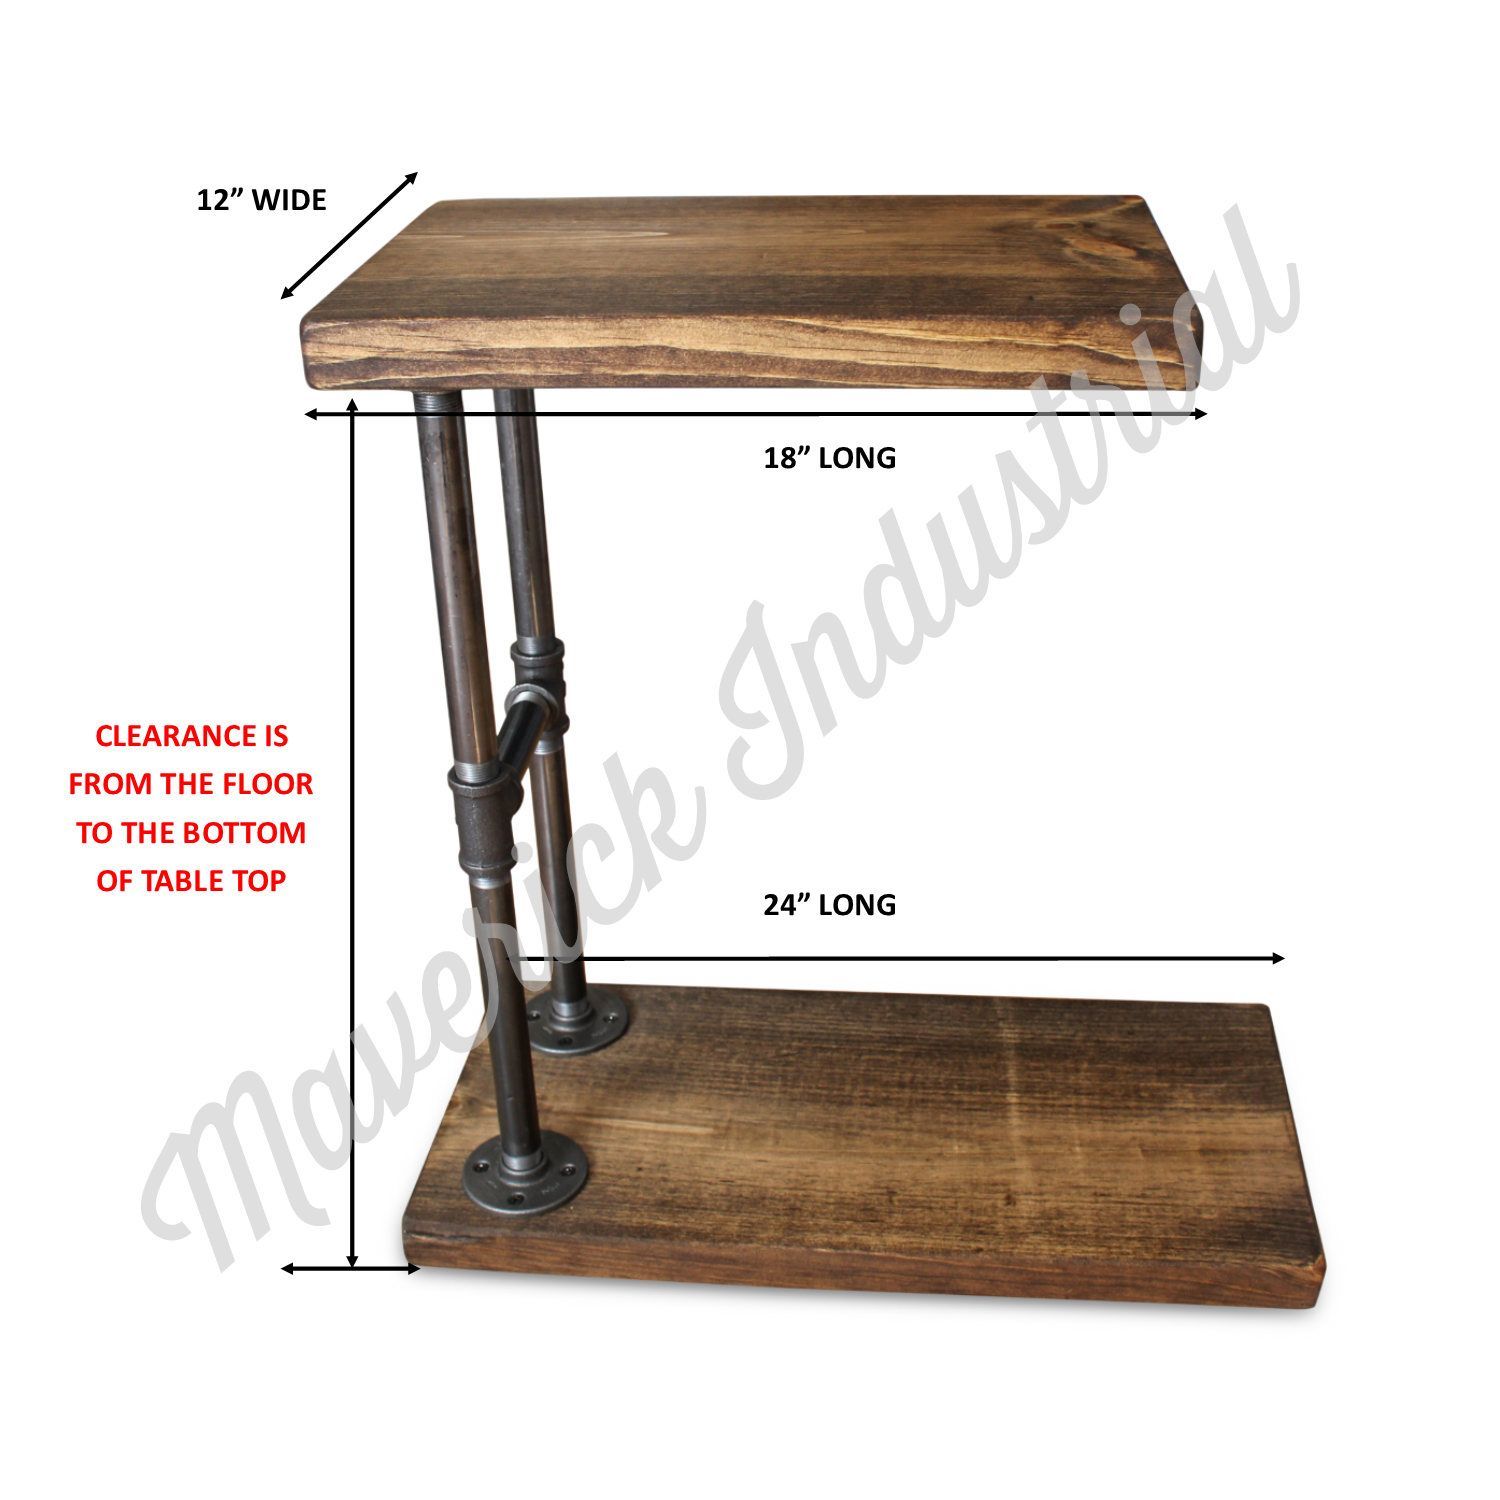 BOGO - Industrial Furniture, Coffee Table, Side Table, Laptop Stand, End Table, Computer Table - CTABLE - BOGO - Industrial Furniture, Coffee Table, Side Table, Laptop Stand, End Table, Computer Table - CTABLE -   18 diy Table stand ideas